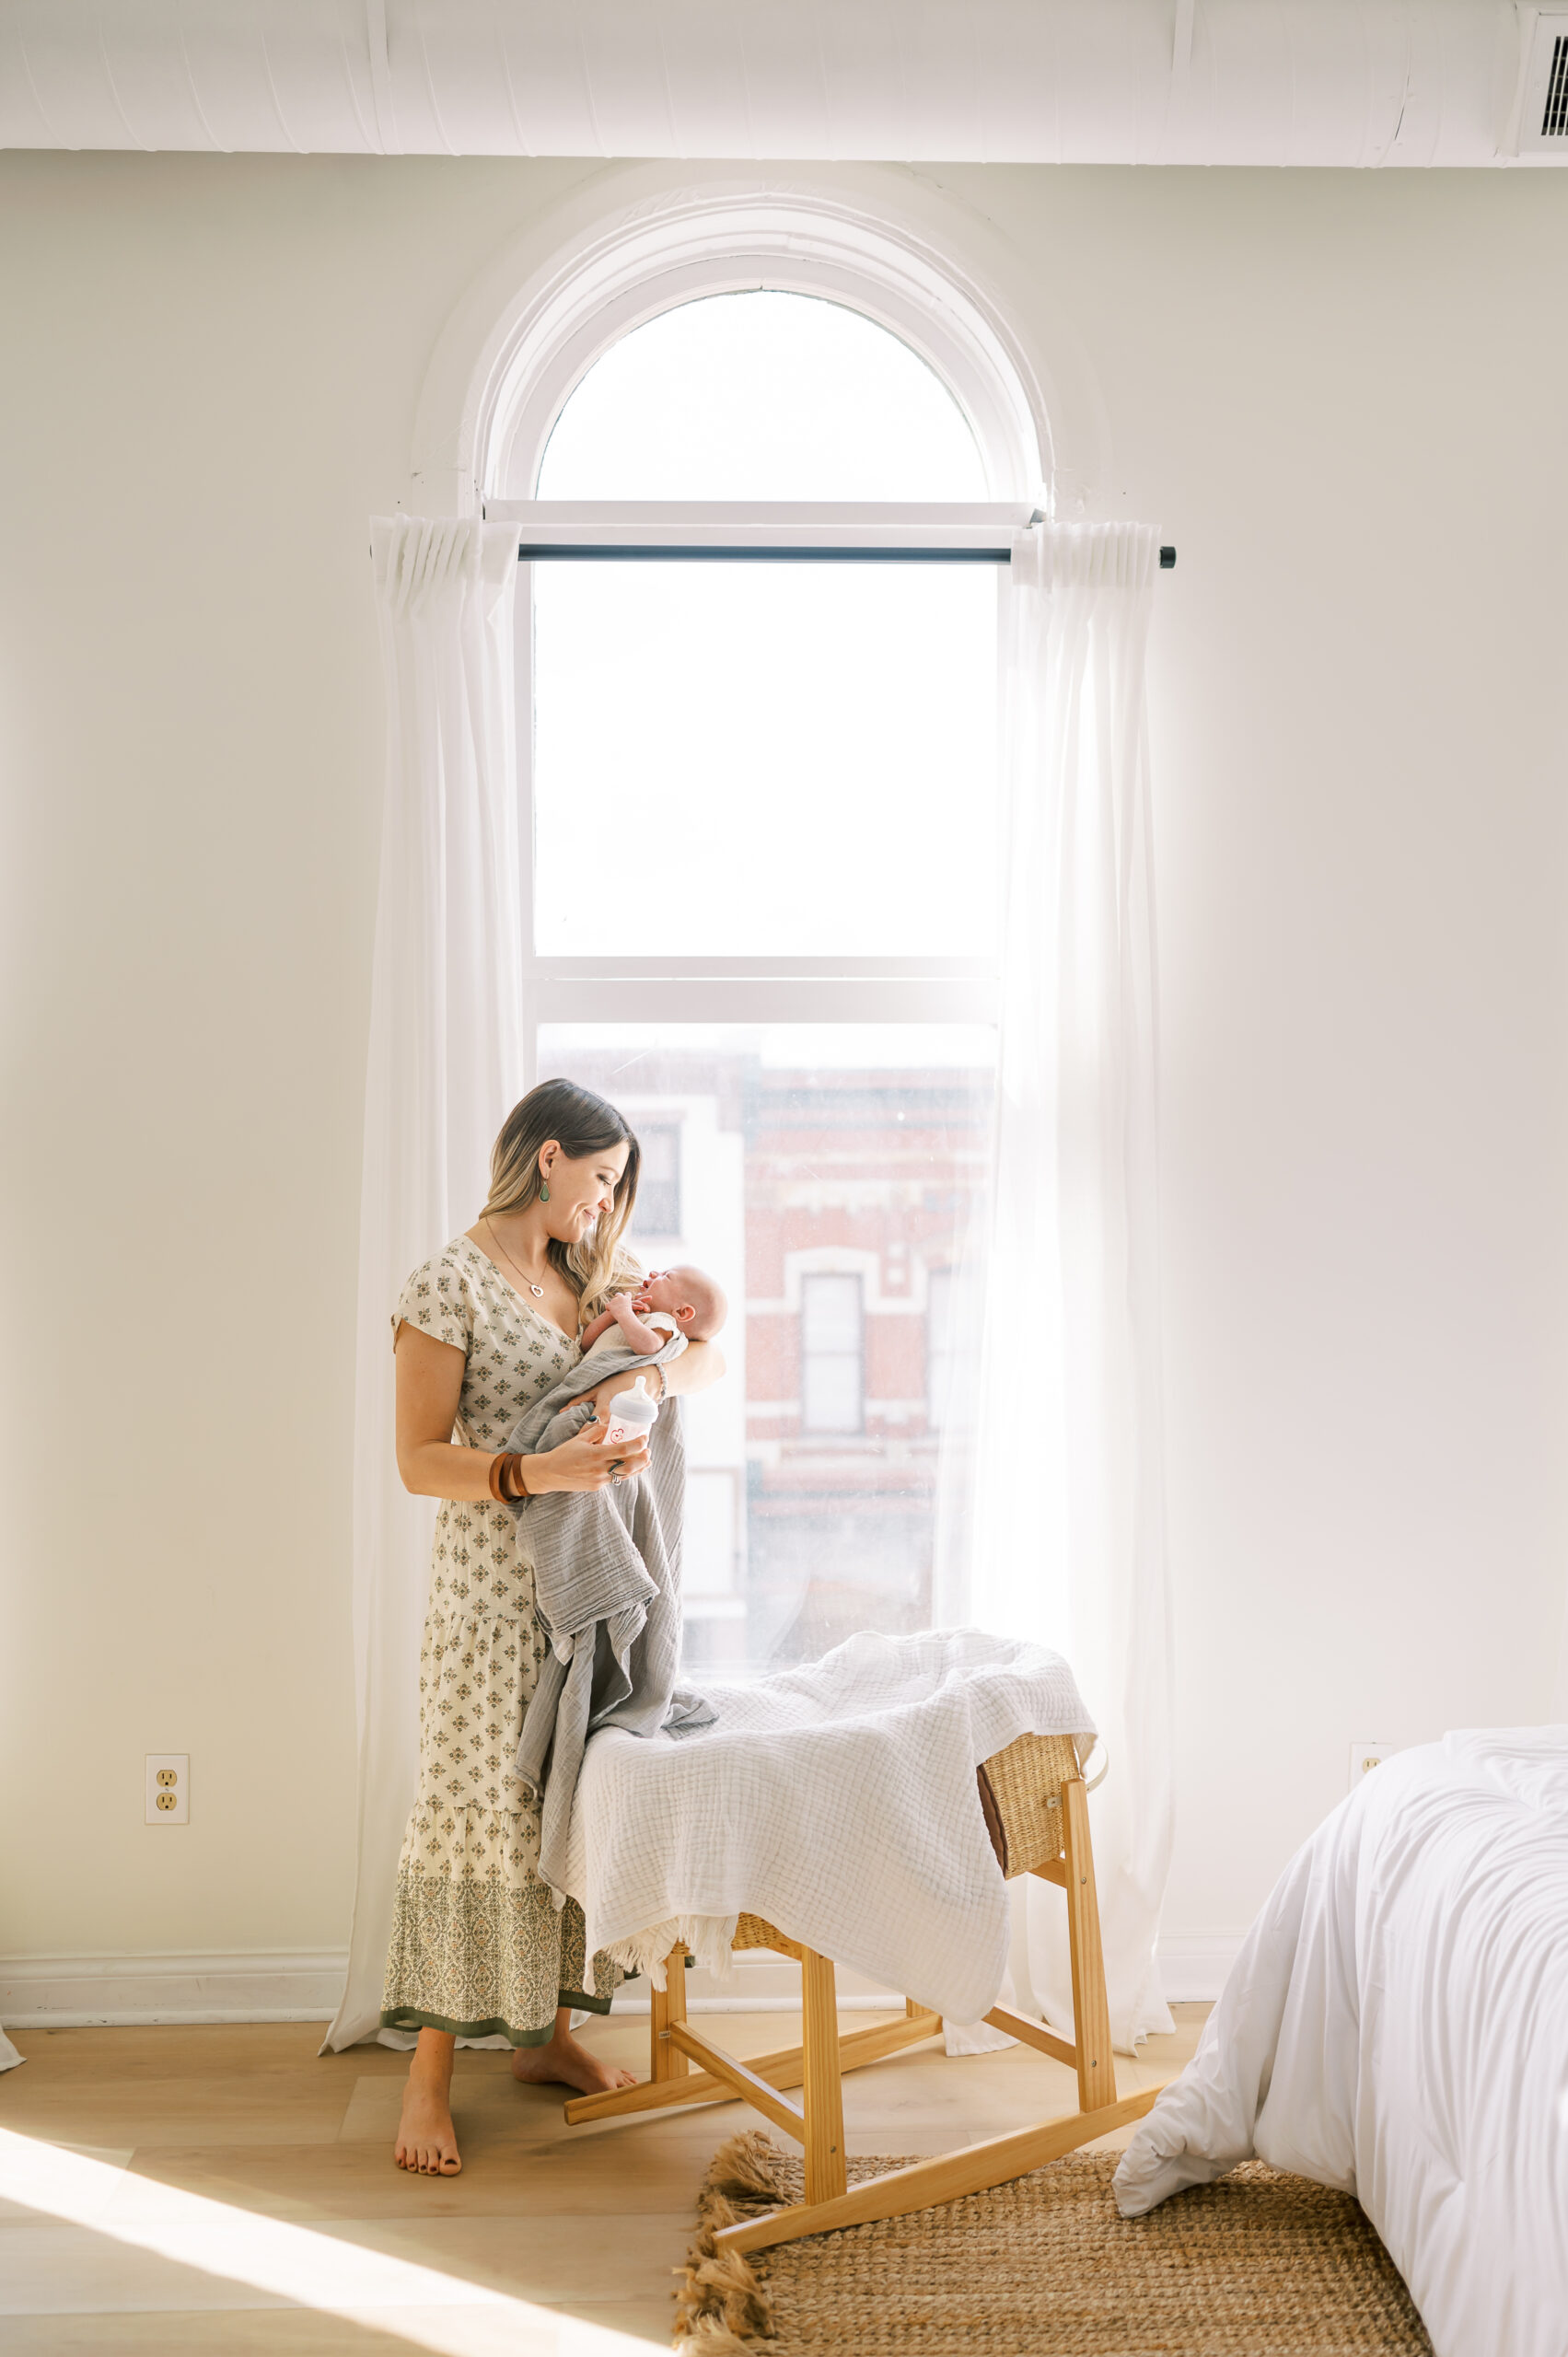 Mom standing in front of tall window holding newborn baby